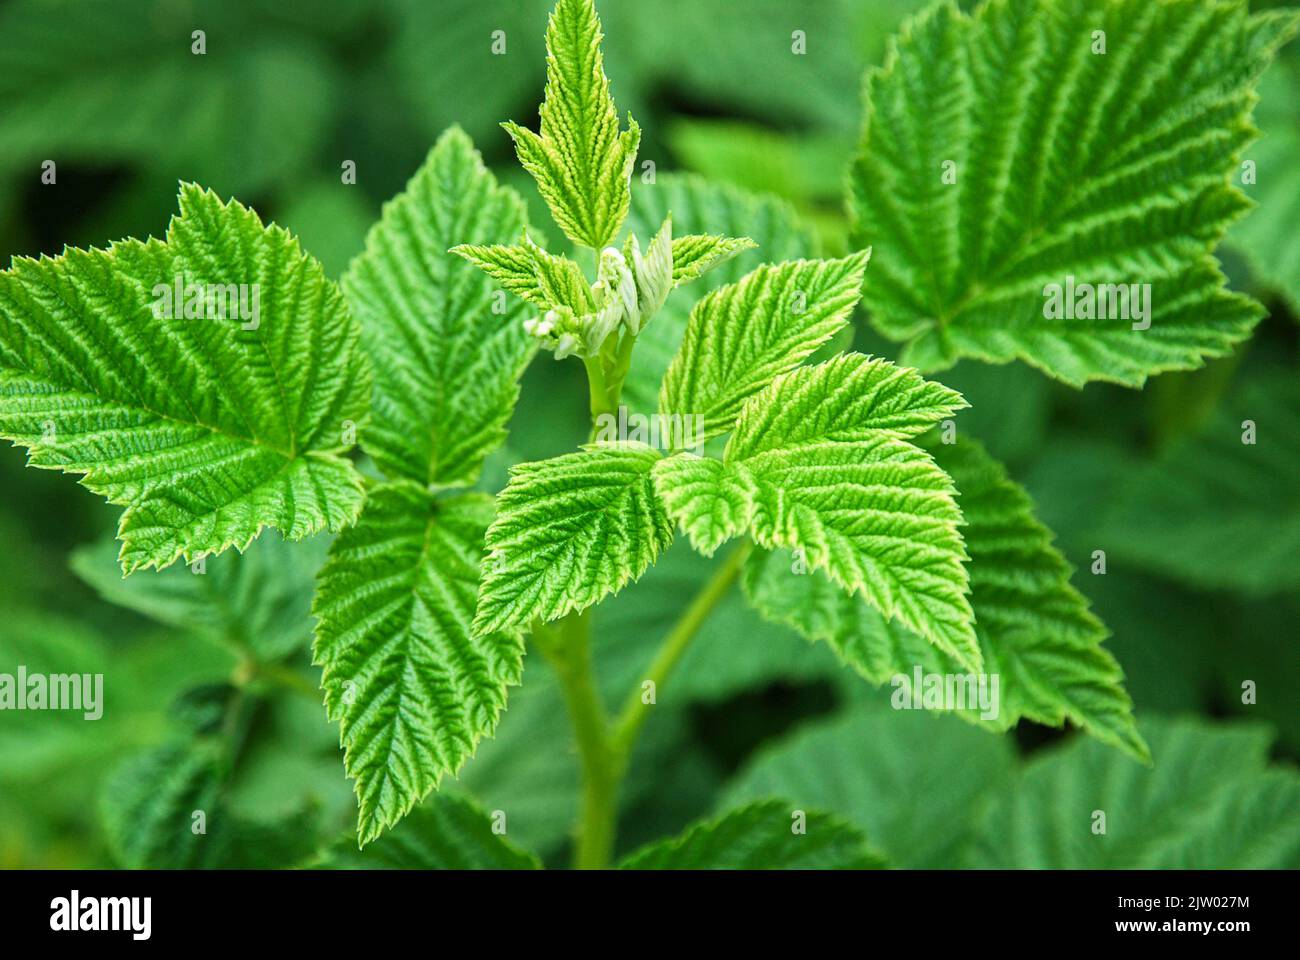 Raspberry plant green leaves in the garden Stock Photo